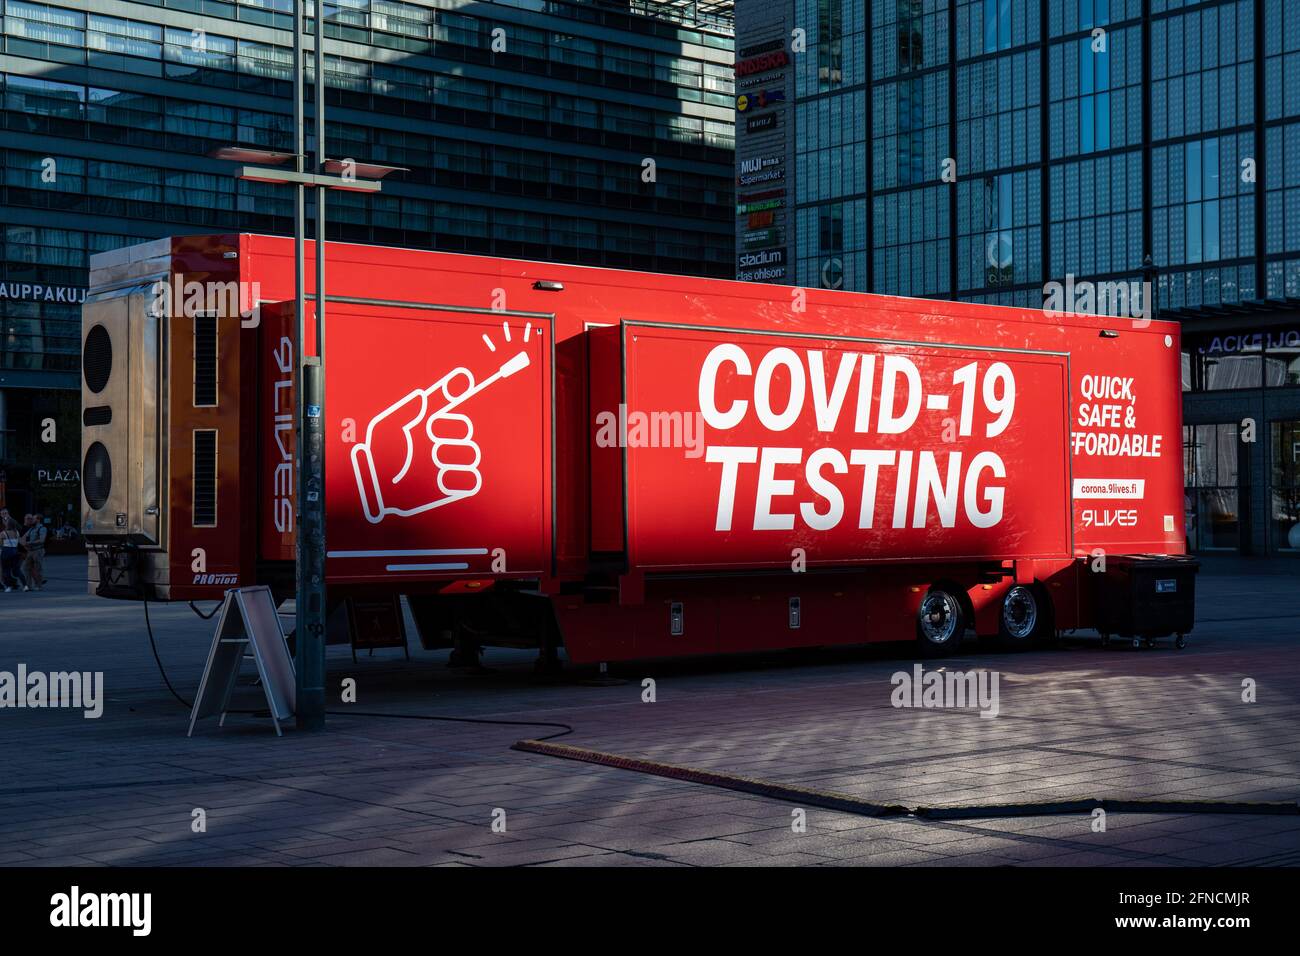 Mobile COVID-19 testing point or trailer or truck at Narinkkatori in Kamppi district of Helsinki, Finland Stock Photo